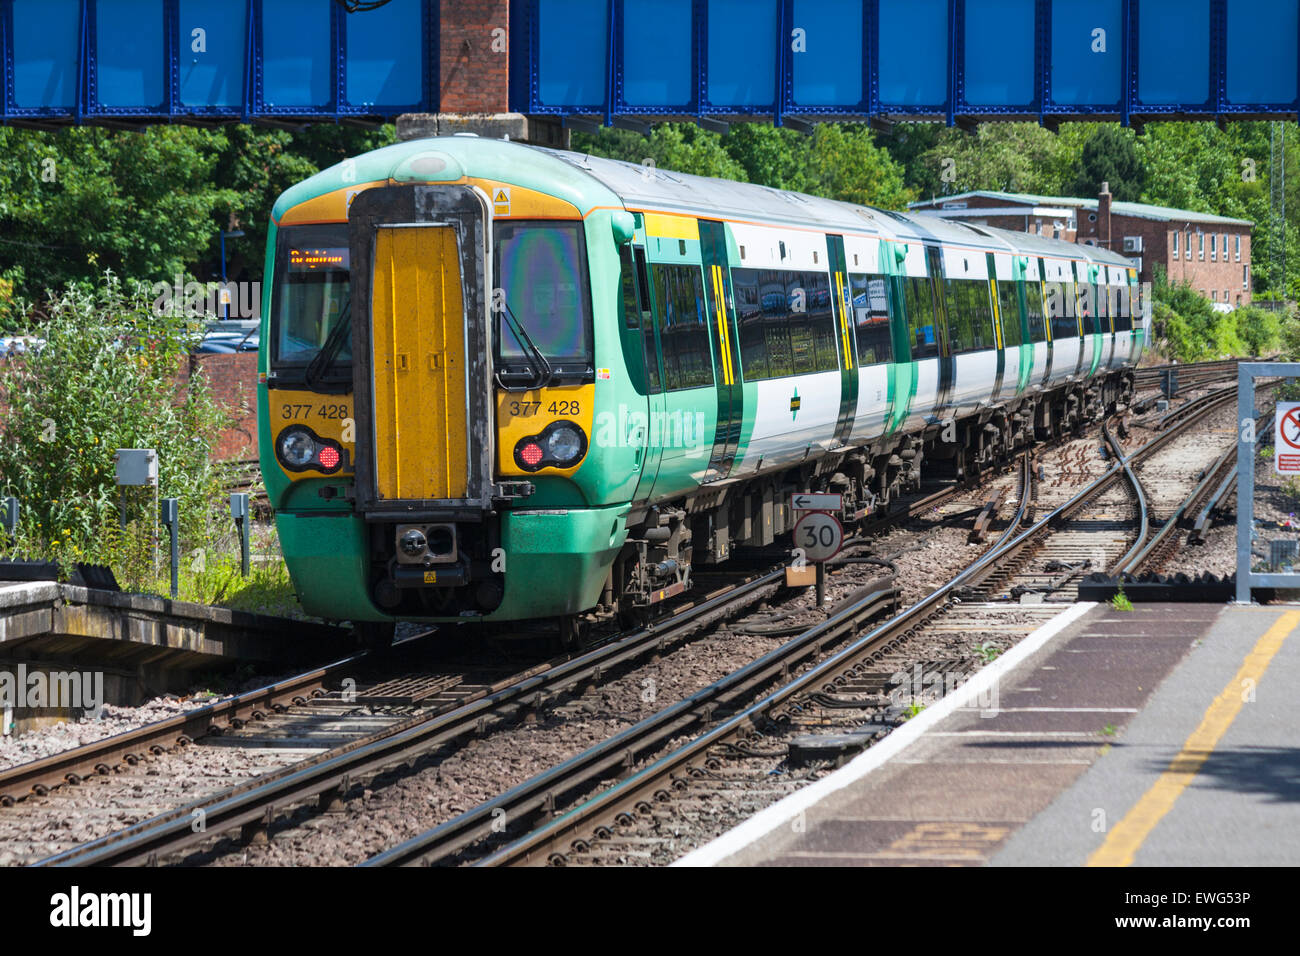 Southern train from Brighton approaching Southampton Central Station, Southampton, Hampshire UK in June Stock Photo